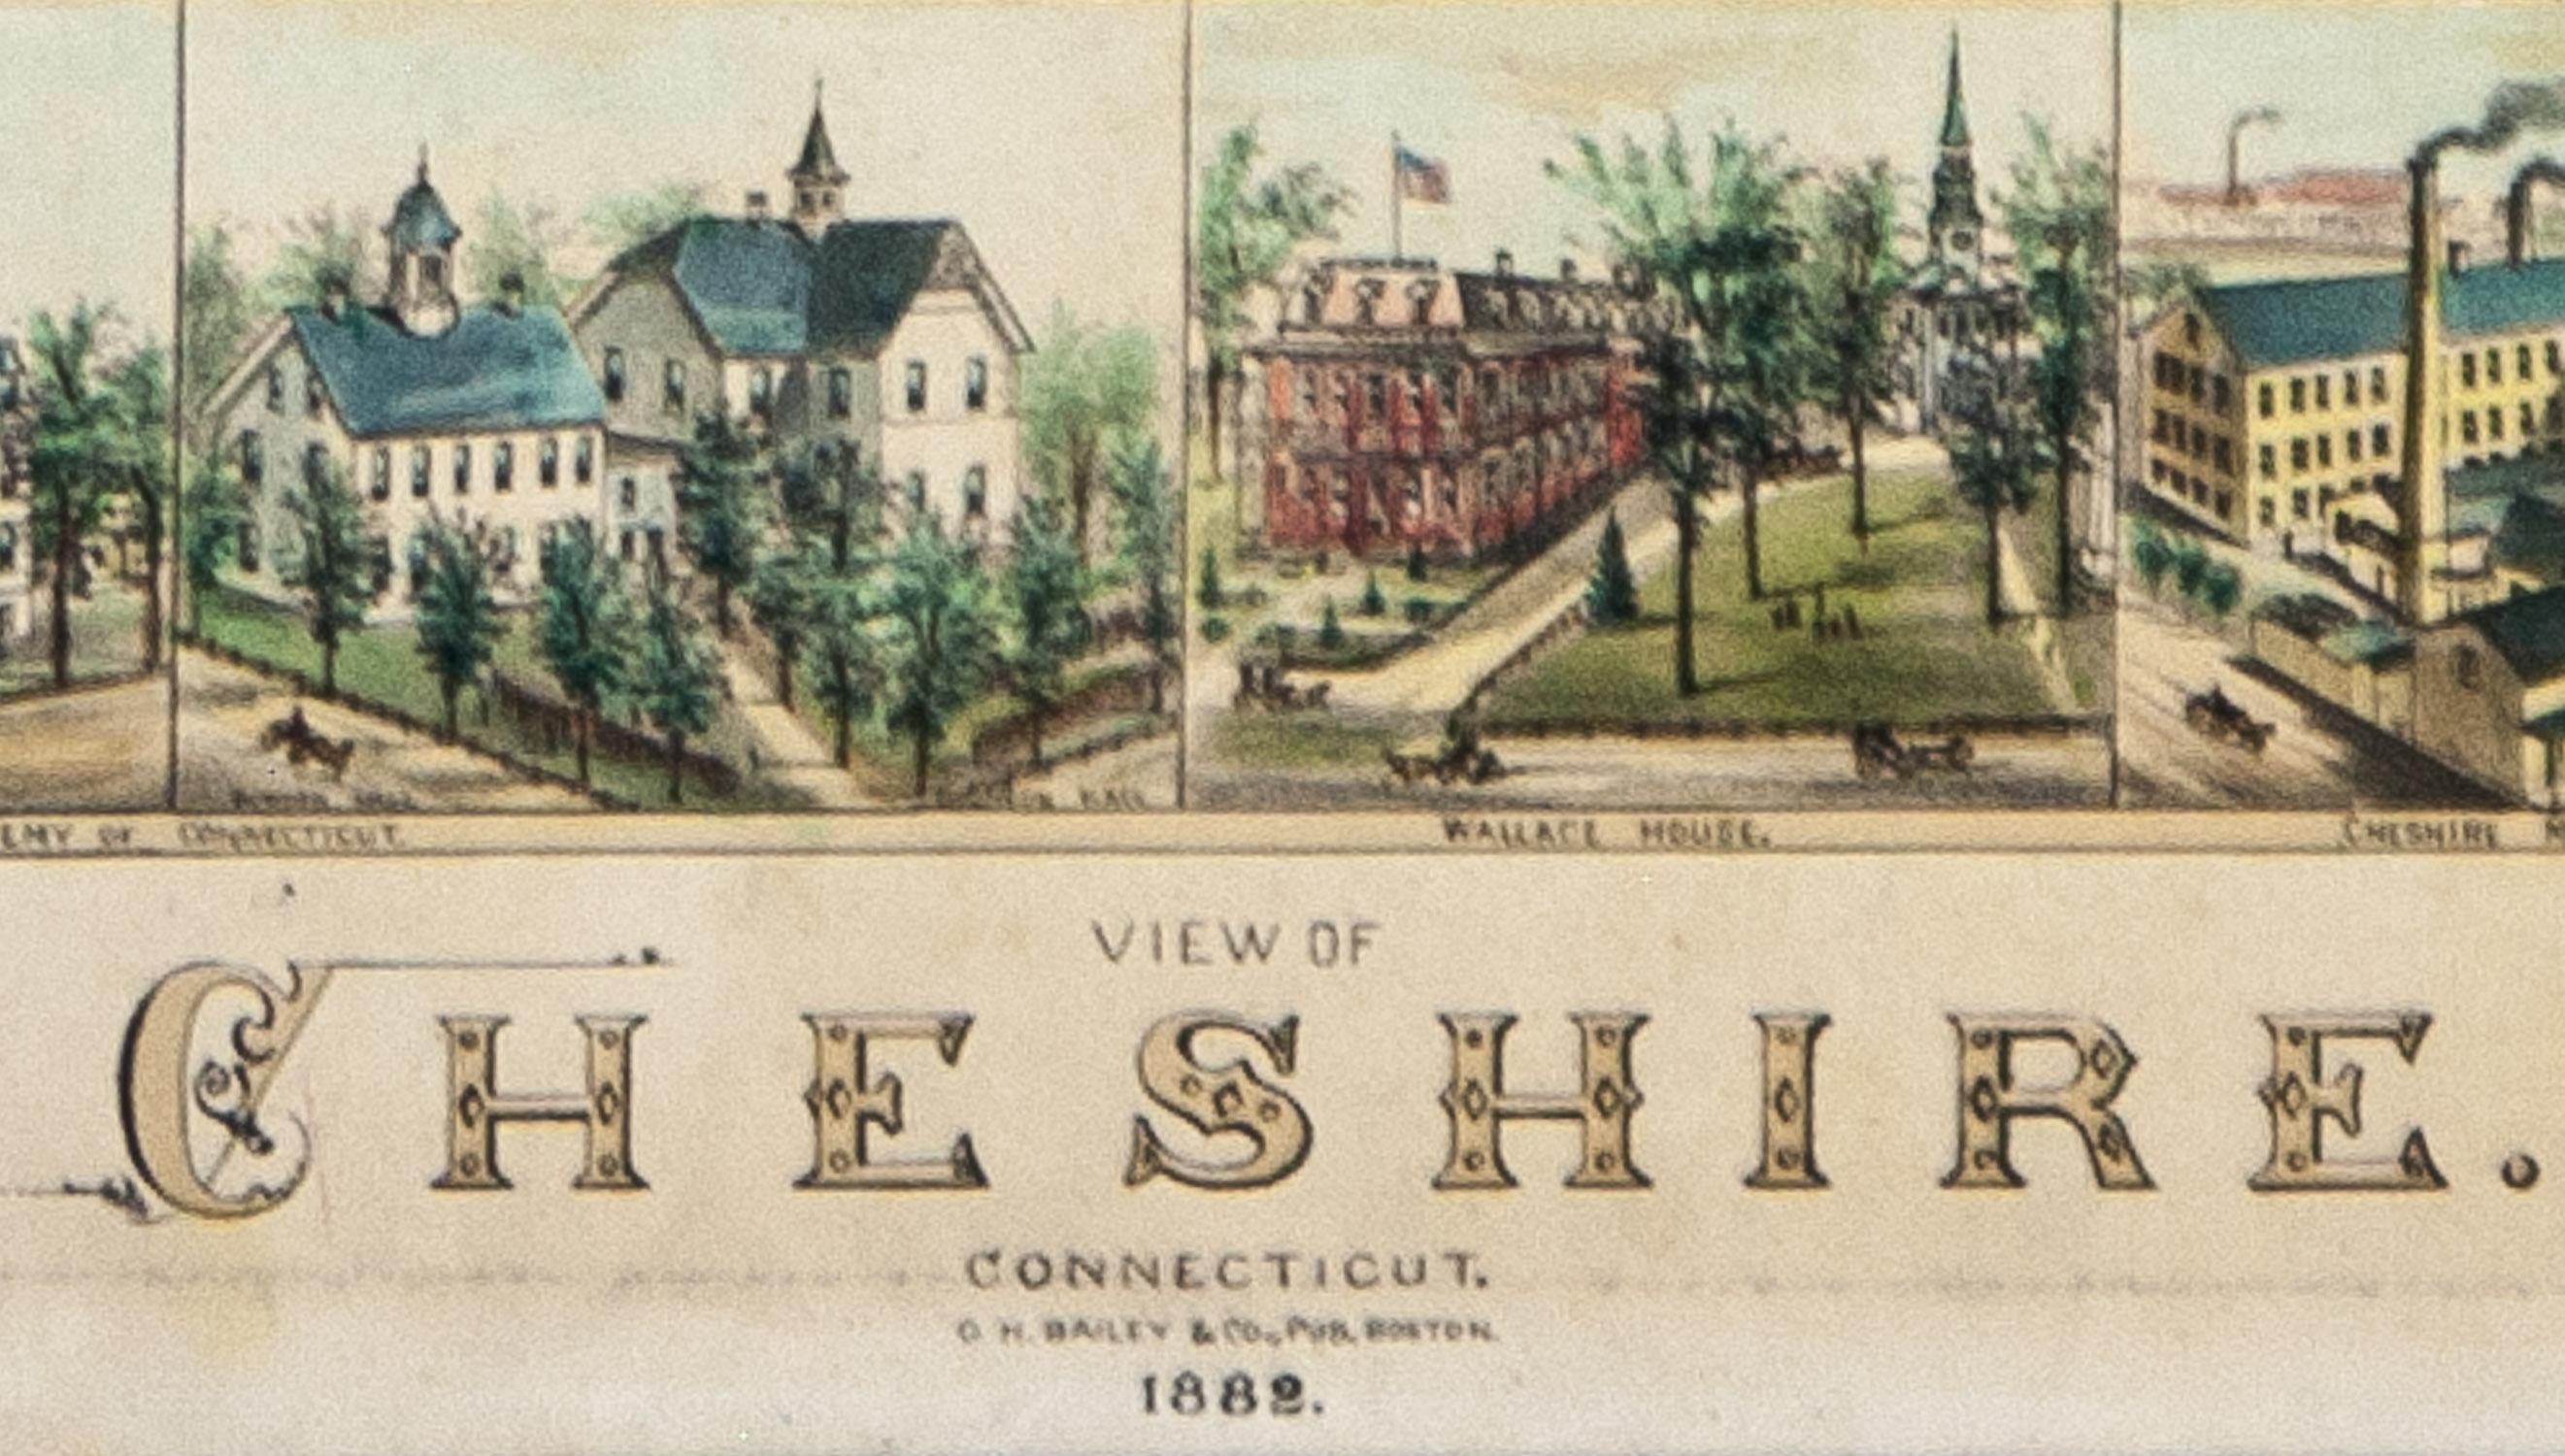       View of Cheshire, Connecticut, 1882. Original lithograph was drawn and published by O. H. Bailey & Co. , a prominent 19th century map maker. The map shows a bird’s eye view of the town as it used to be, including street names and old